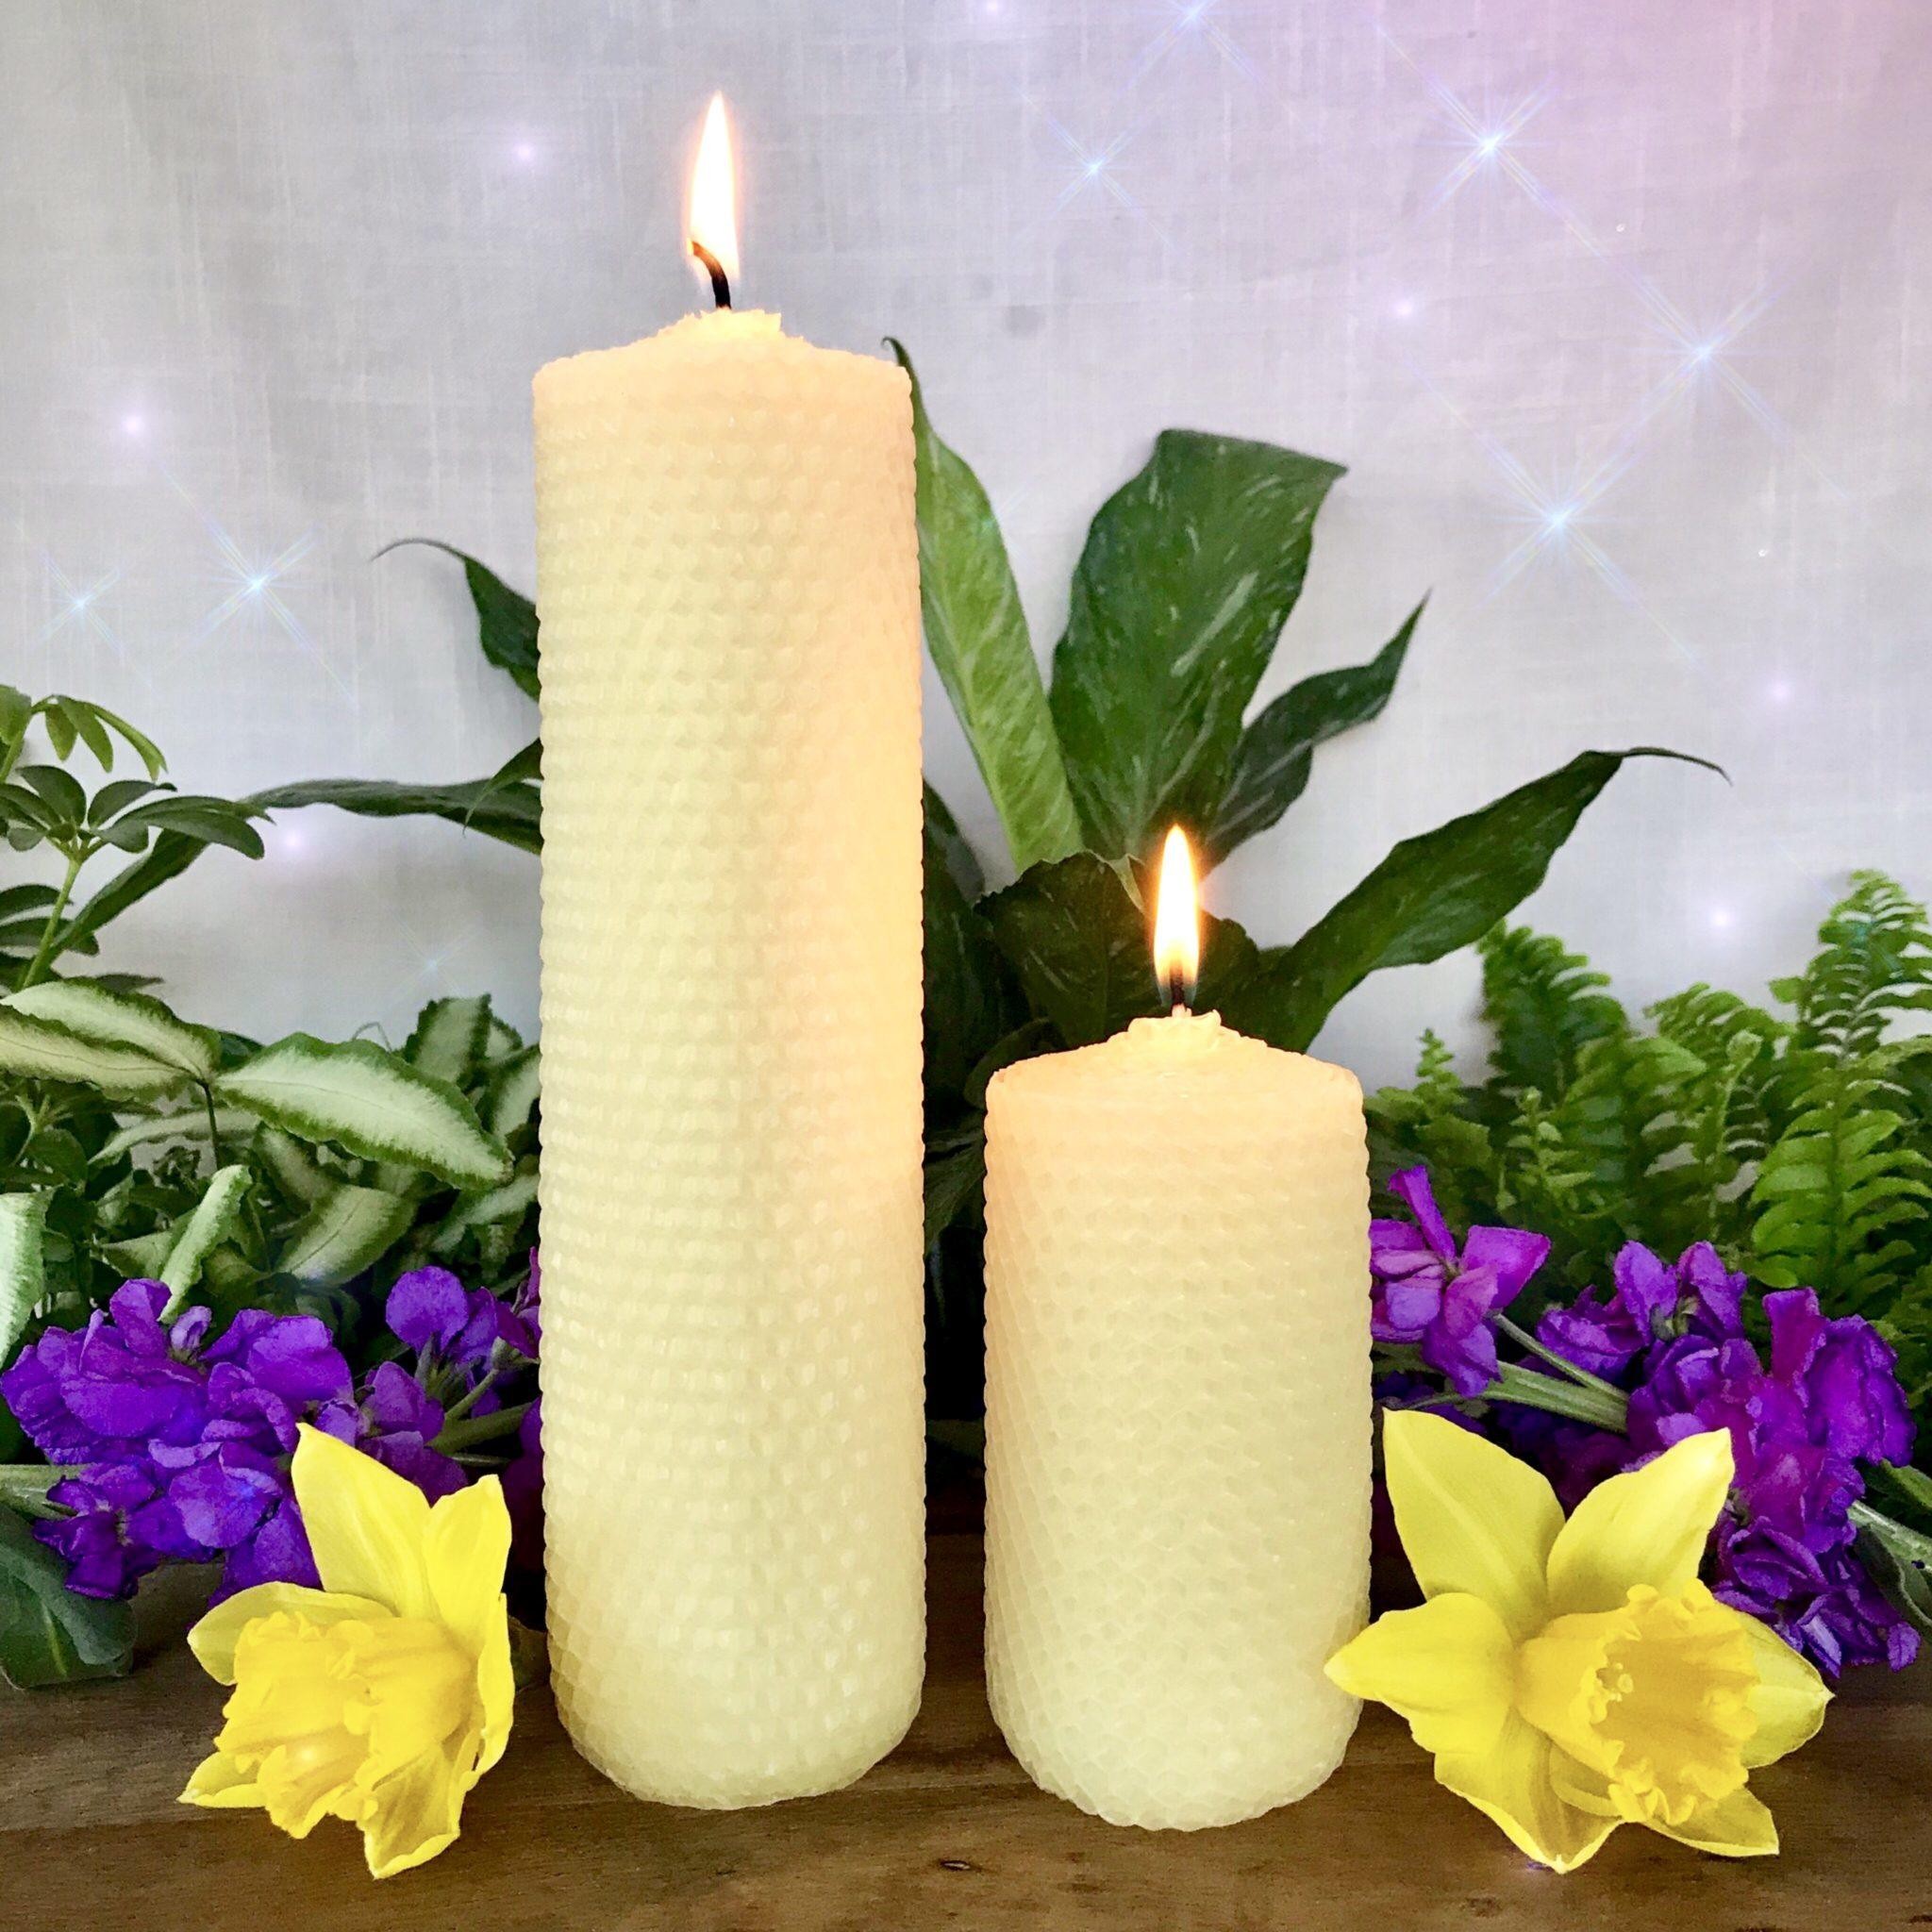 Golden Beeswax Altar Intention Candle